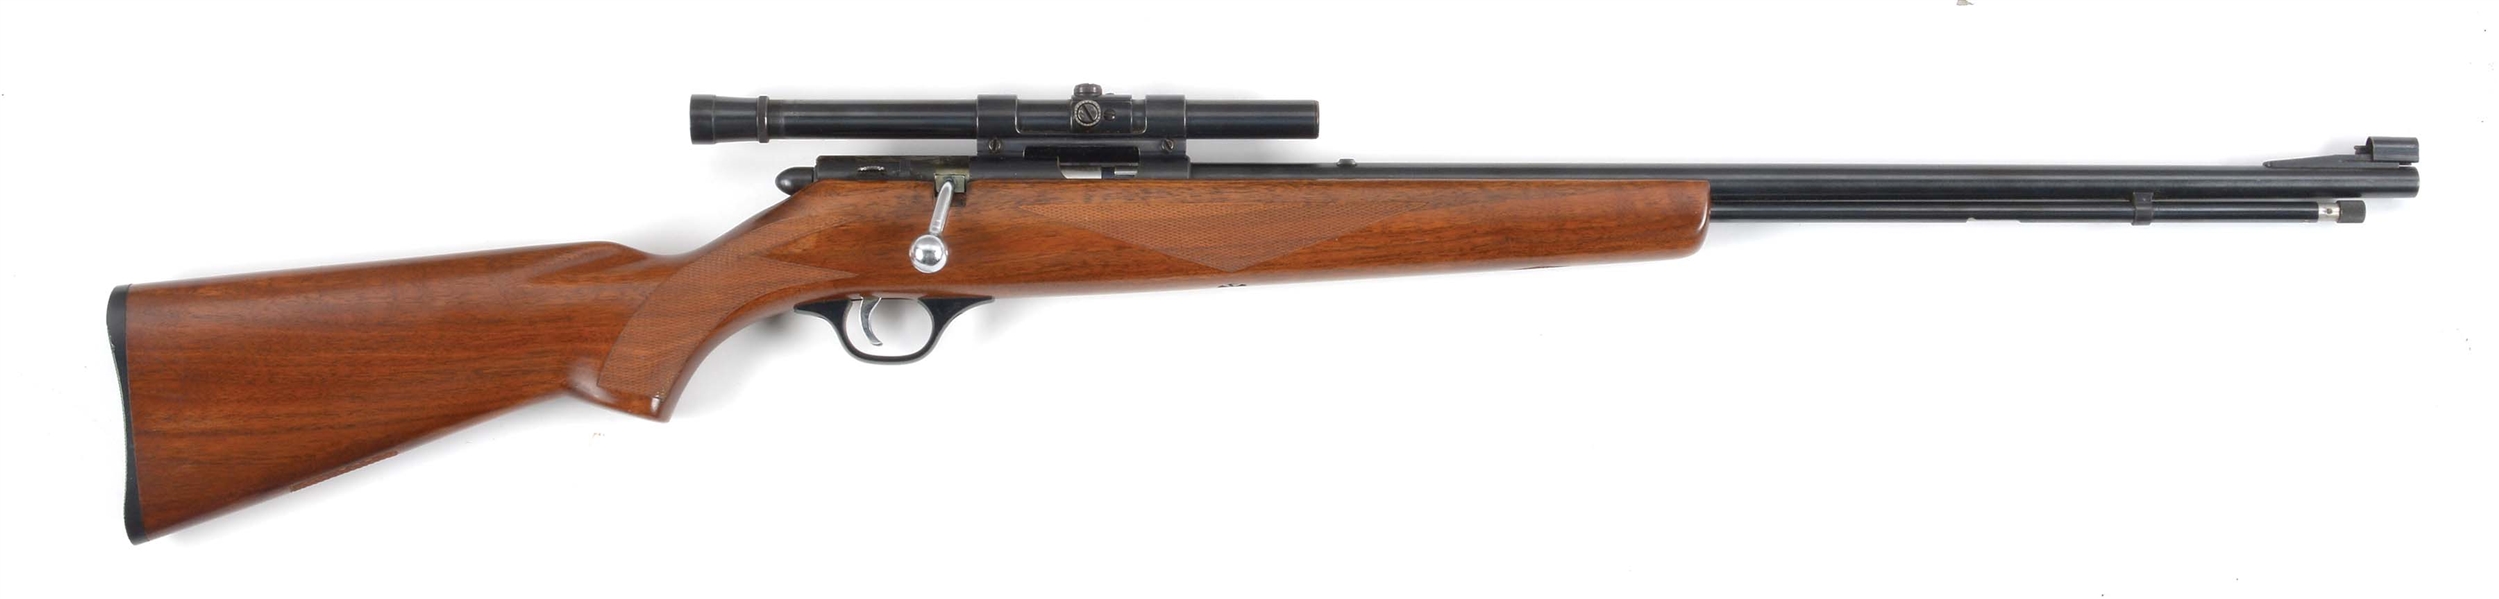 (C) MARLIN MODEL 81-DL BOLT ACTION RIFLE WITH SCOPE.